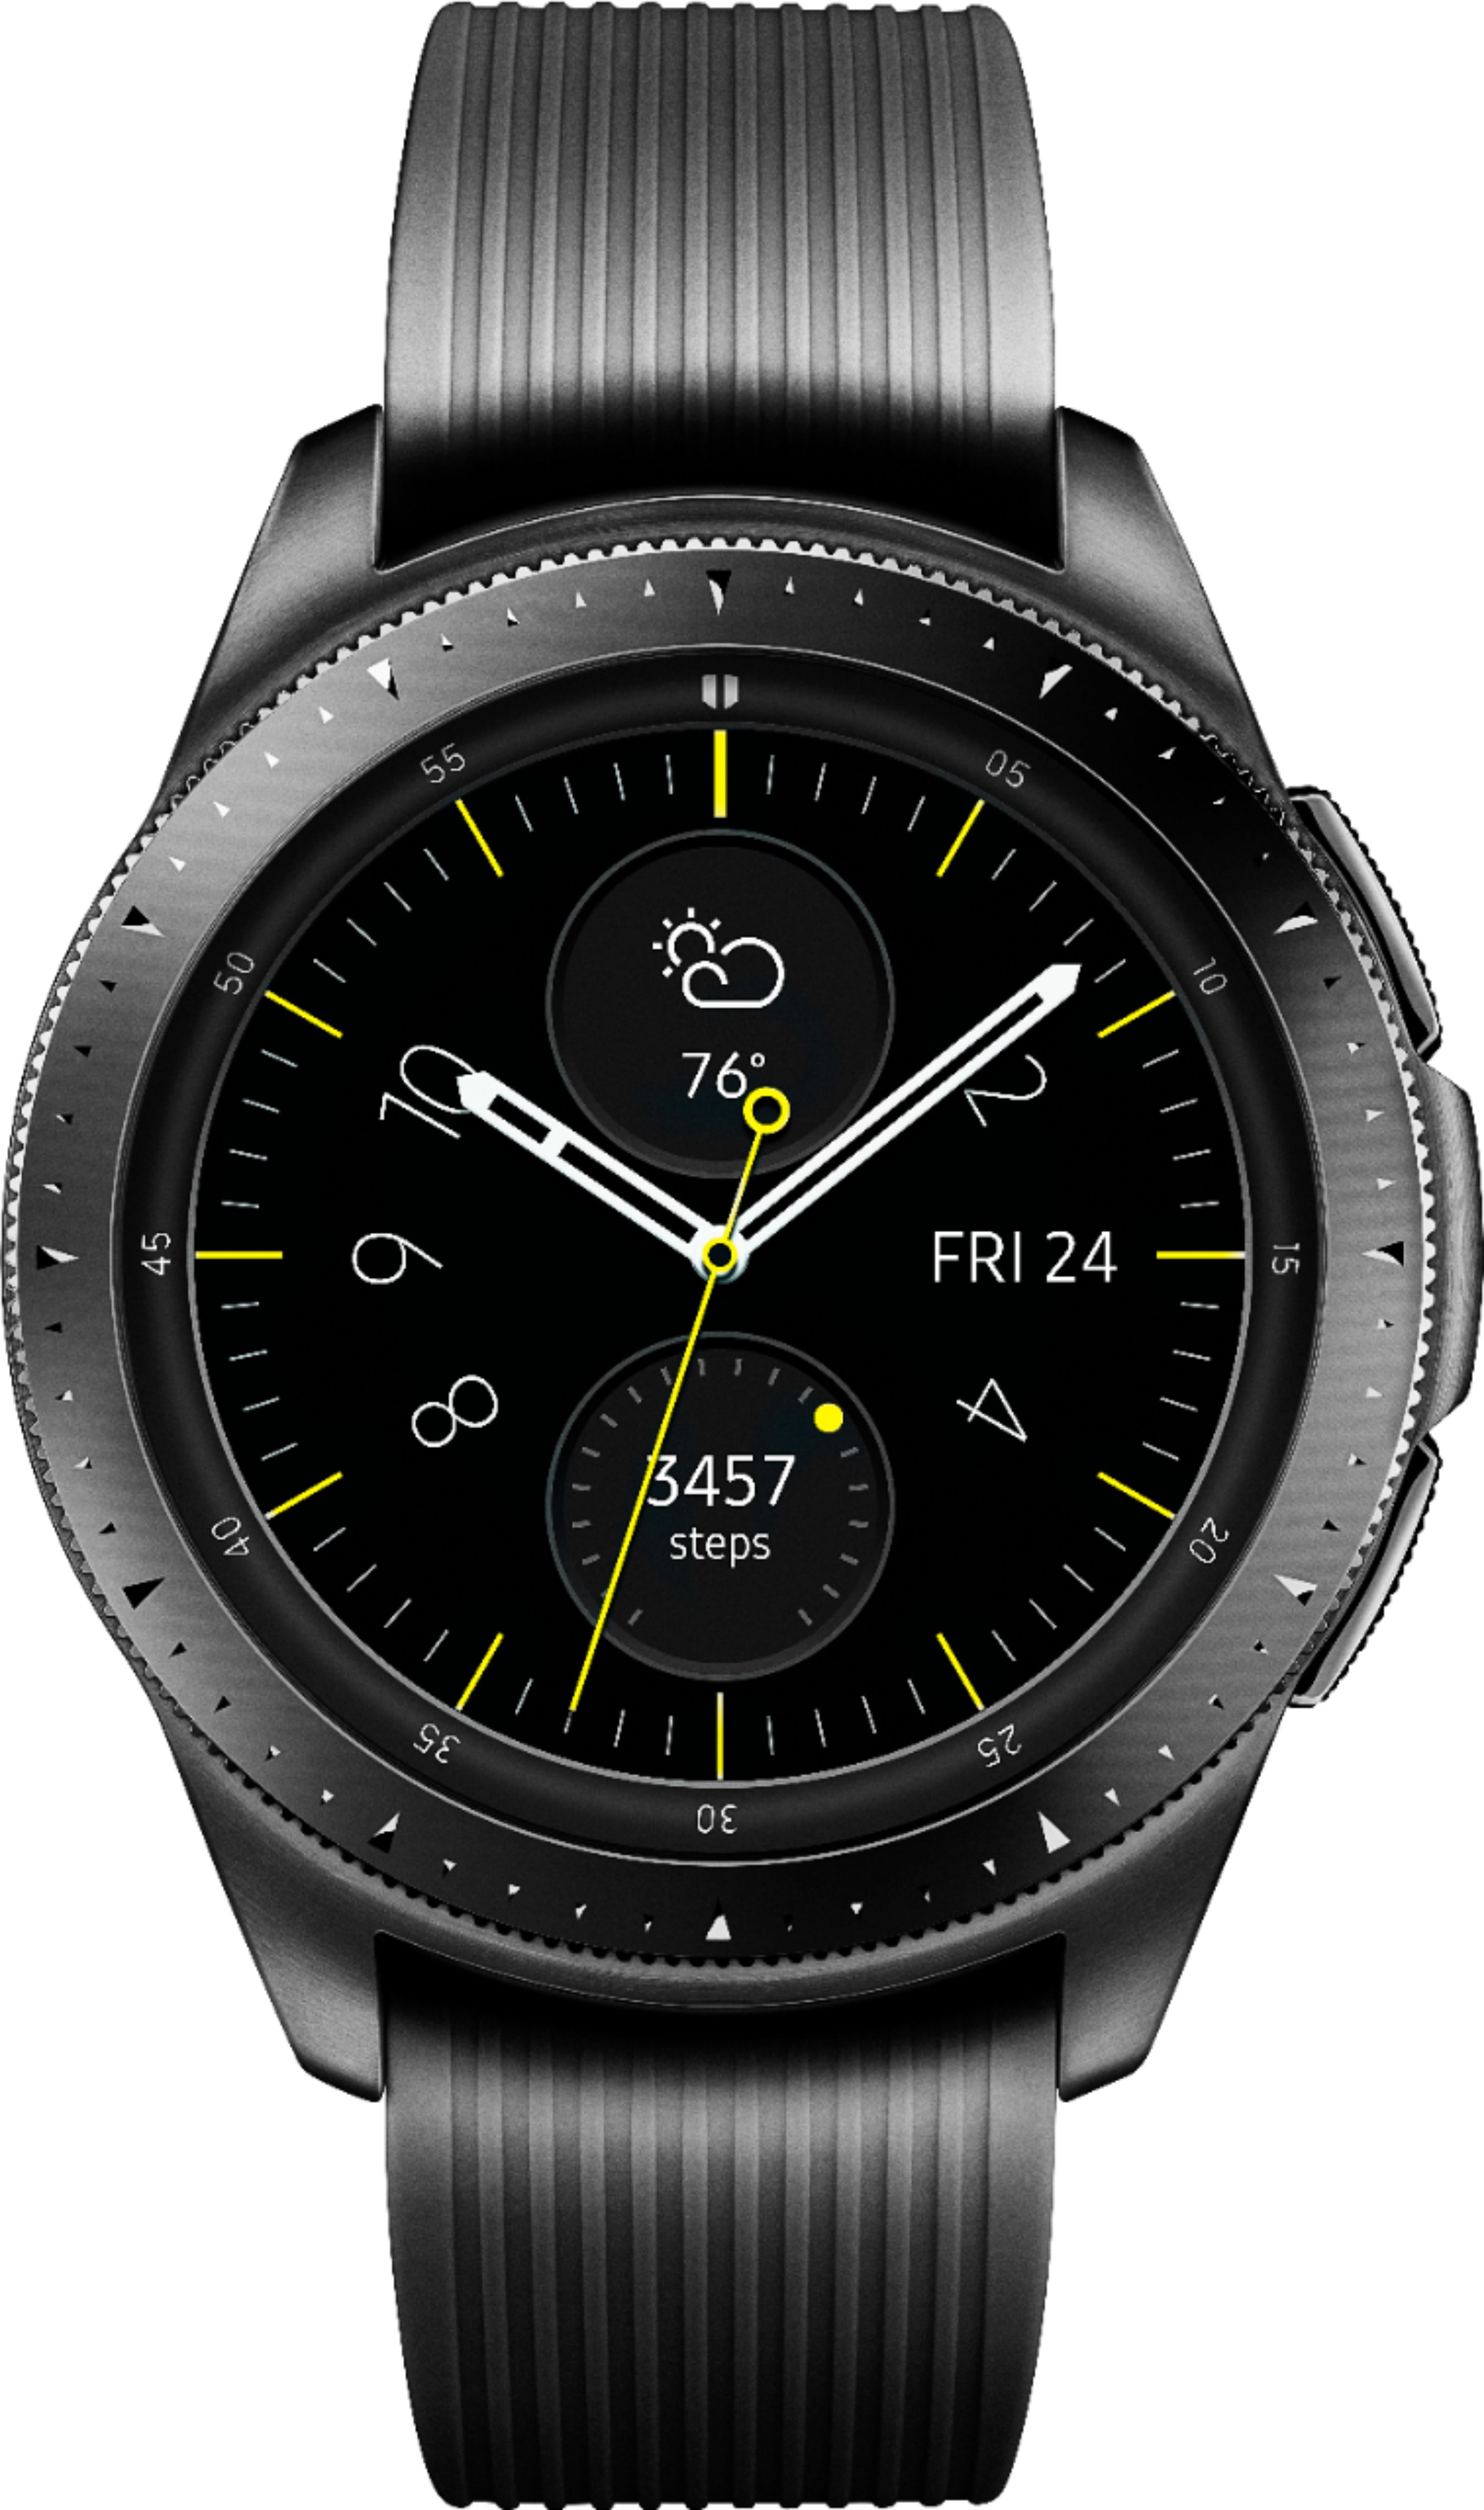 cellular watch android